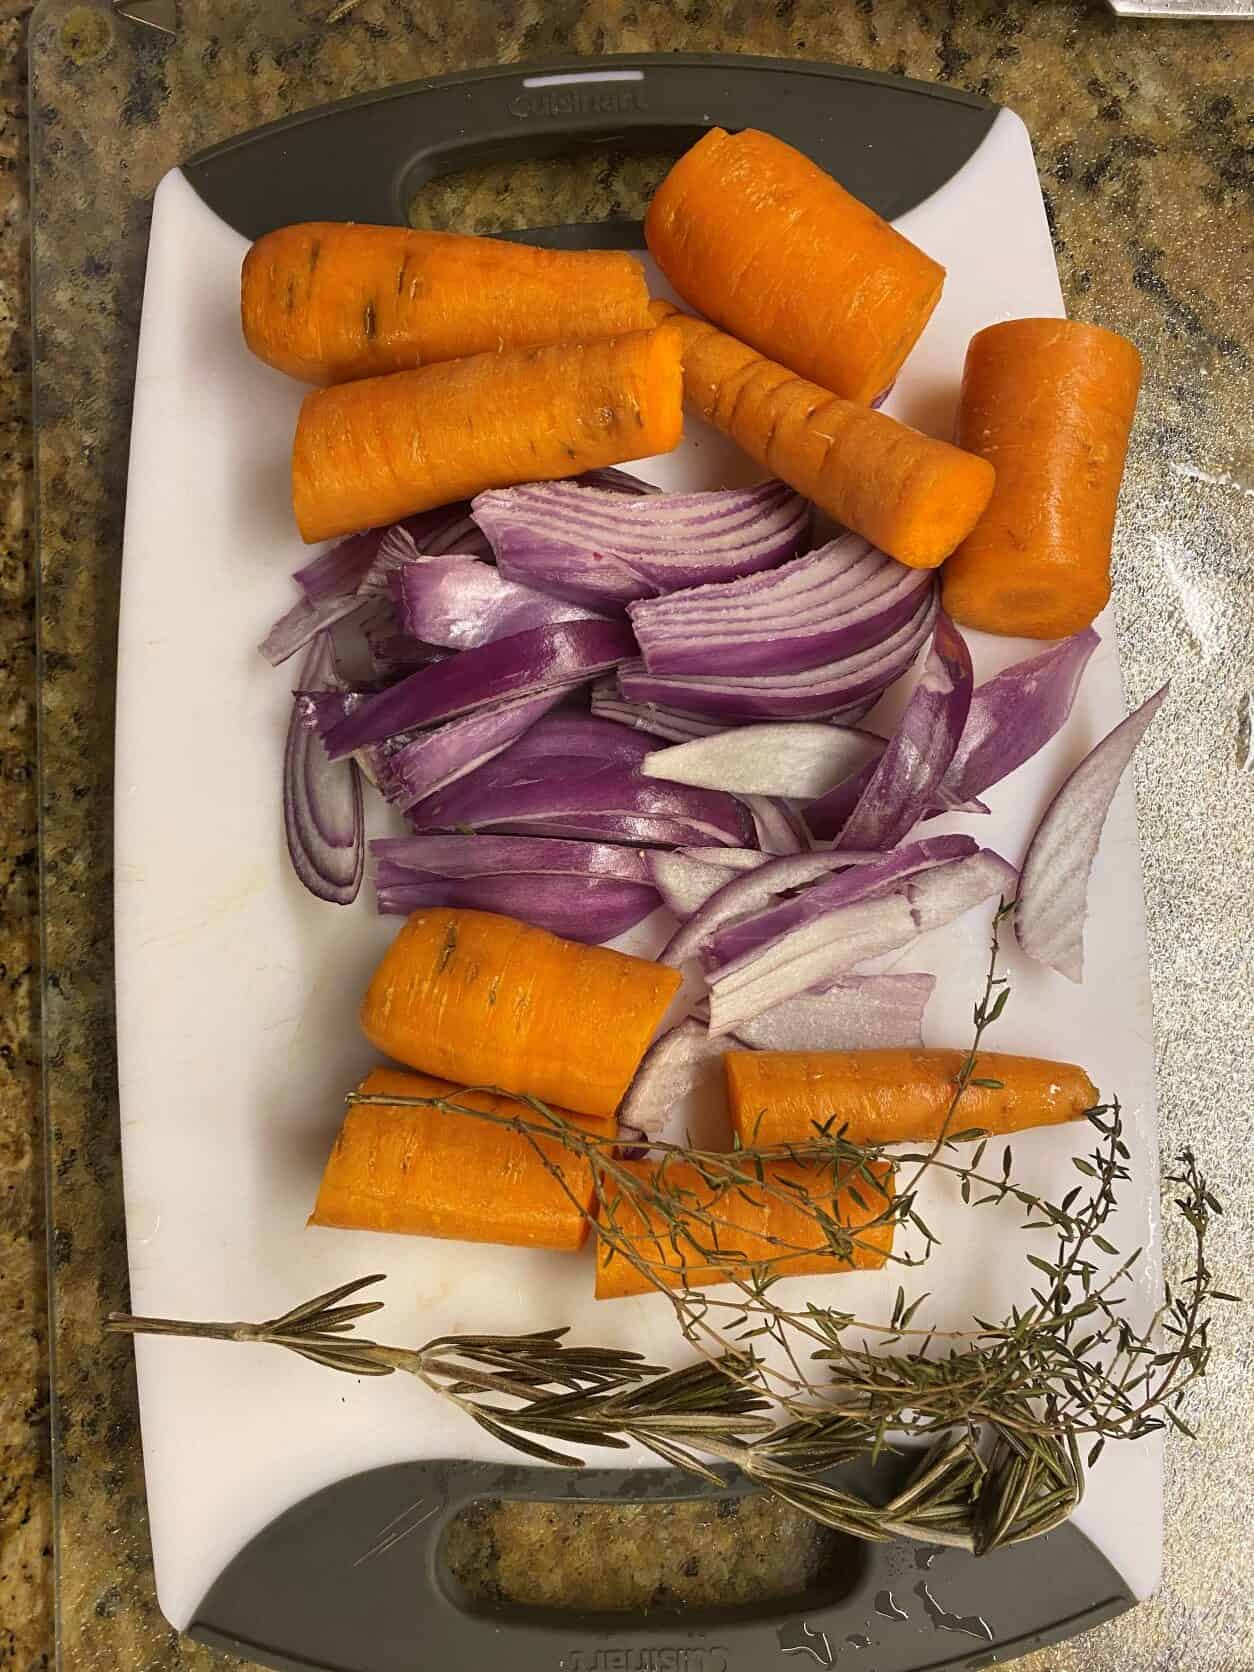 slice onions and carrots on a cutting board